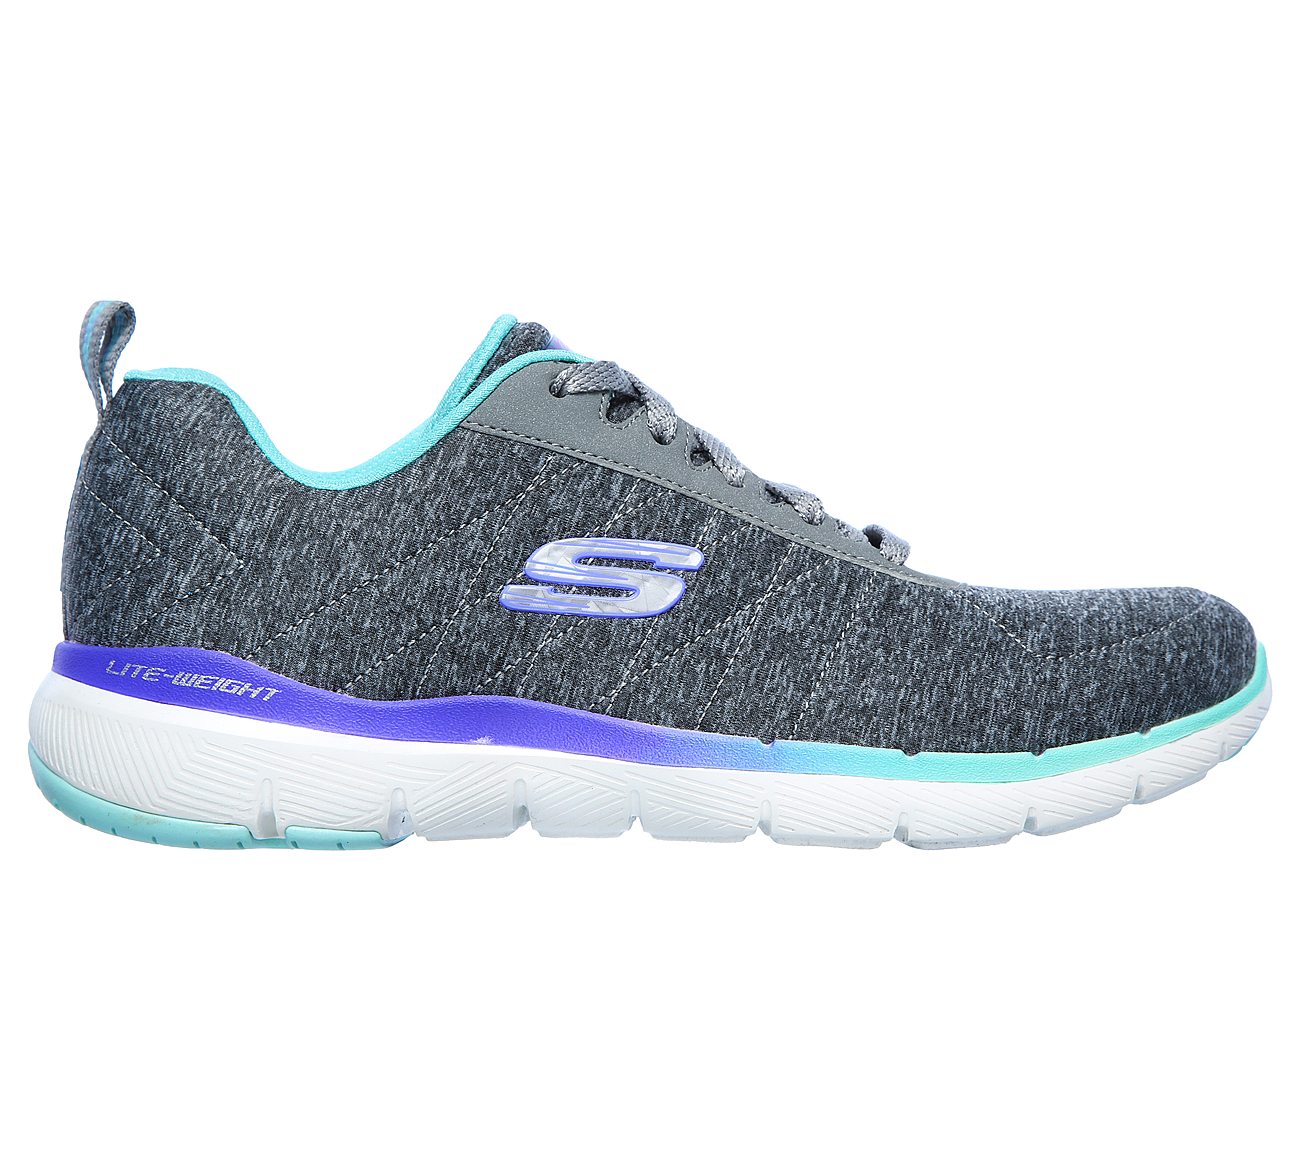 skechers in bournemouth